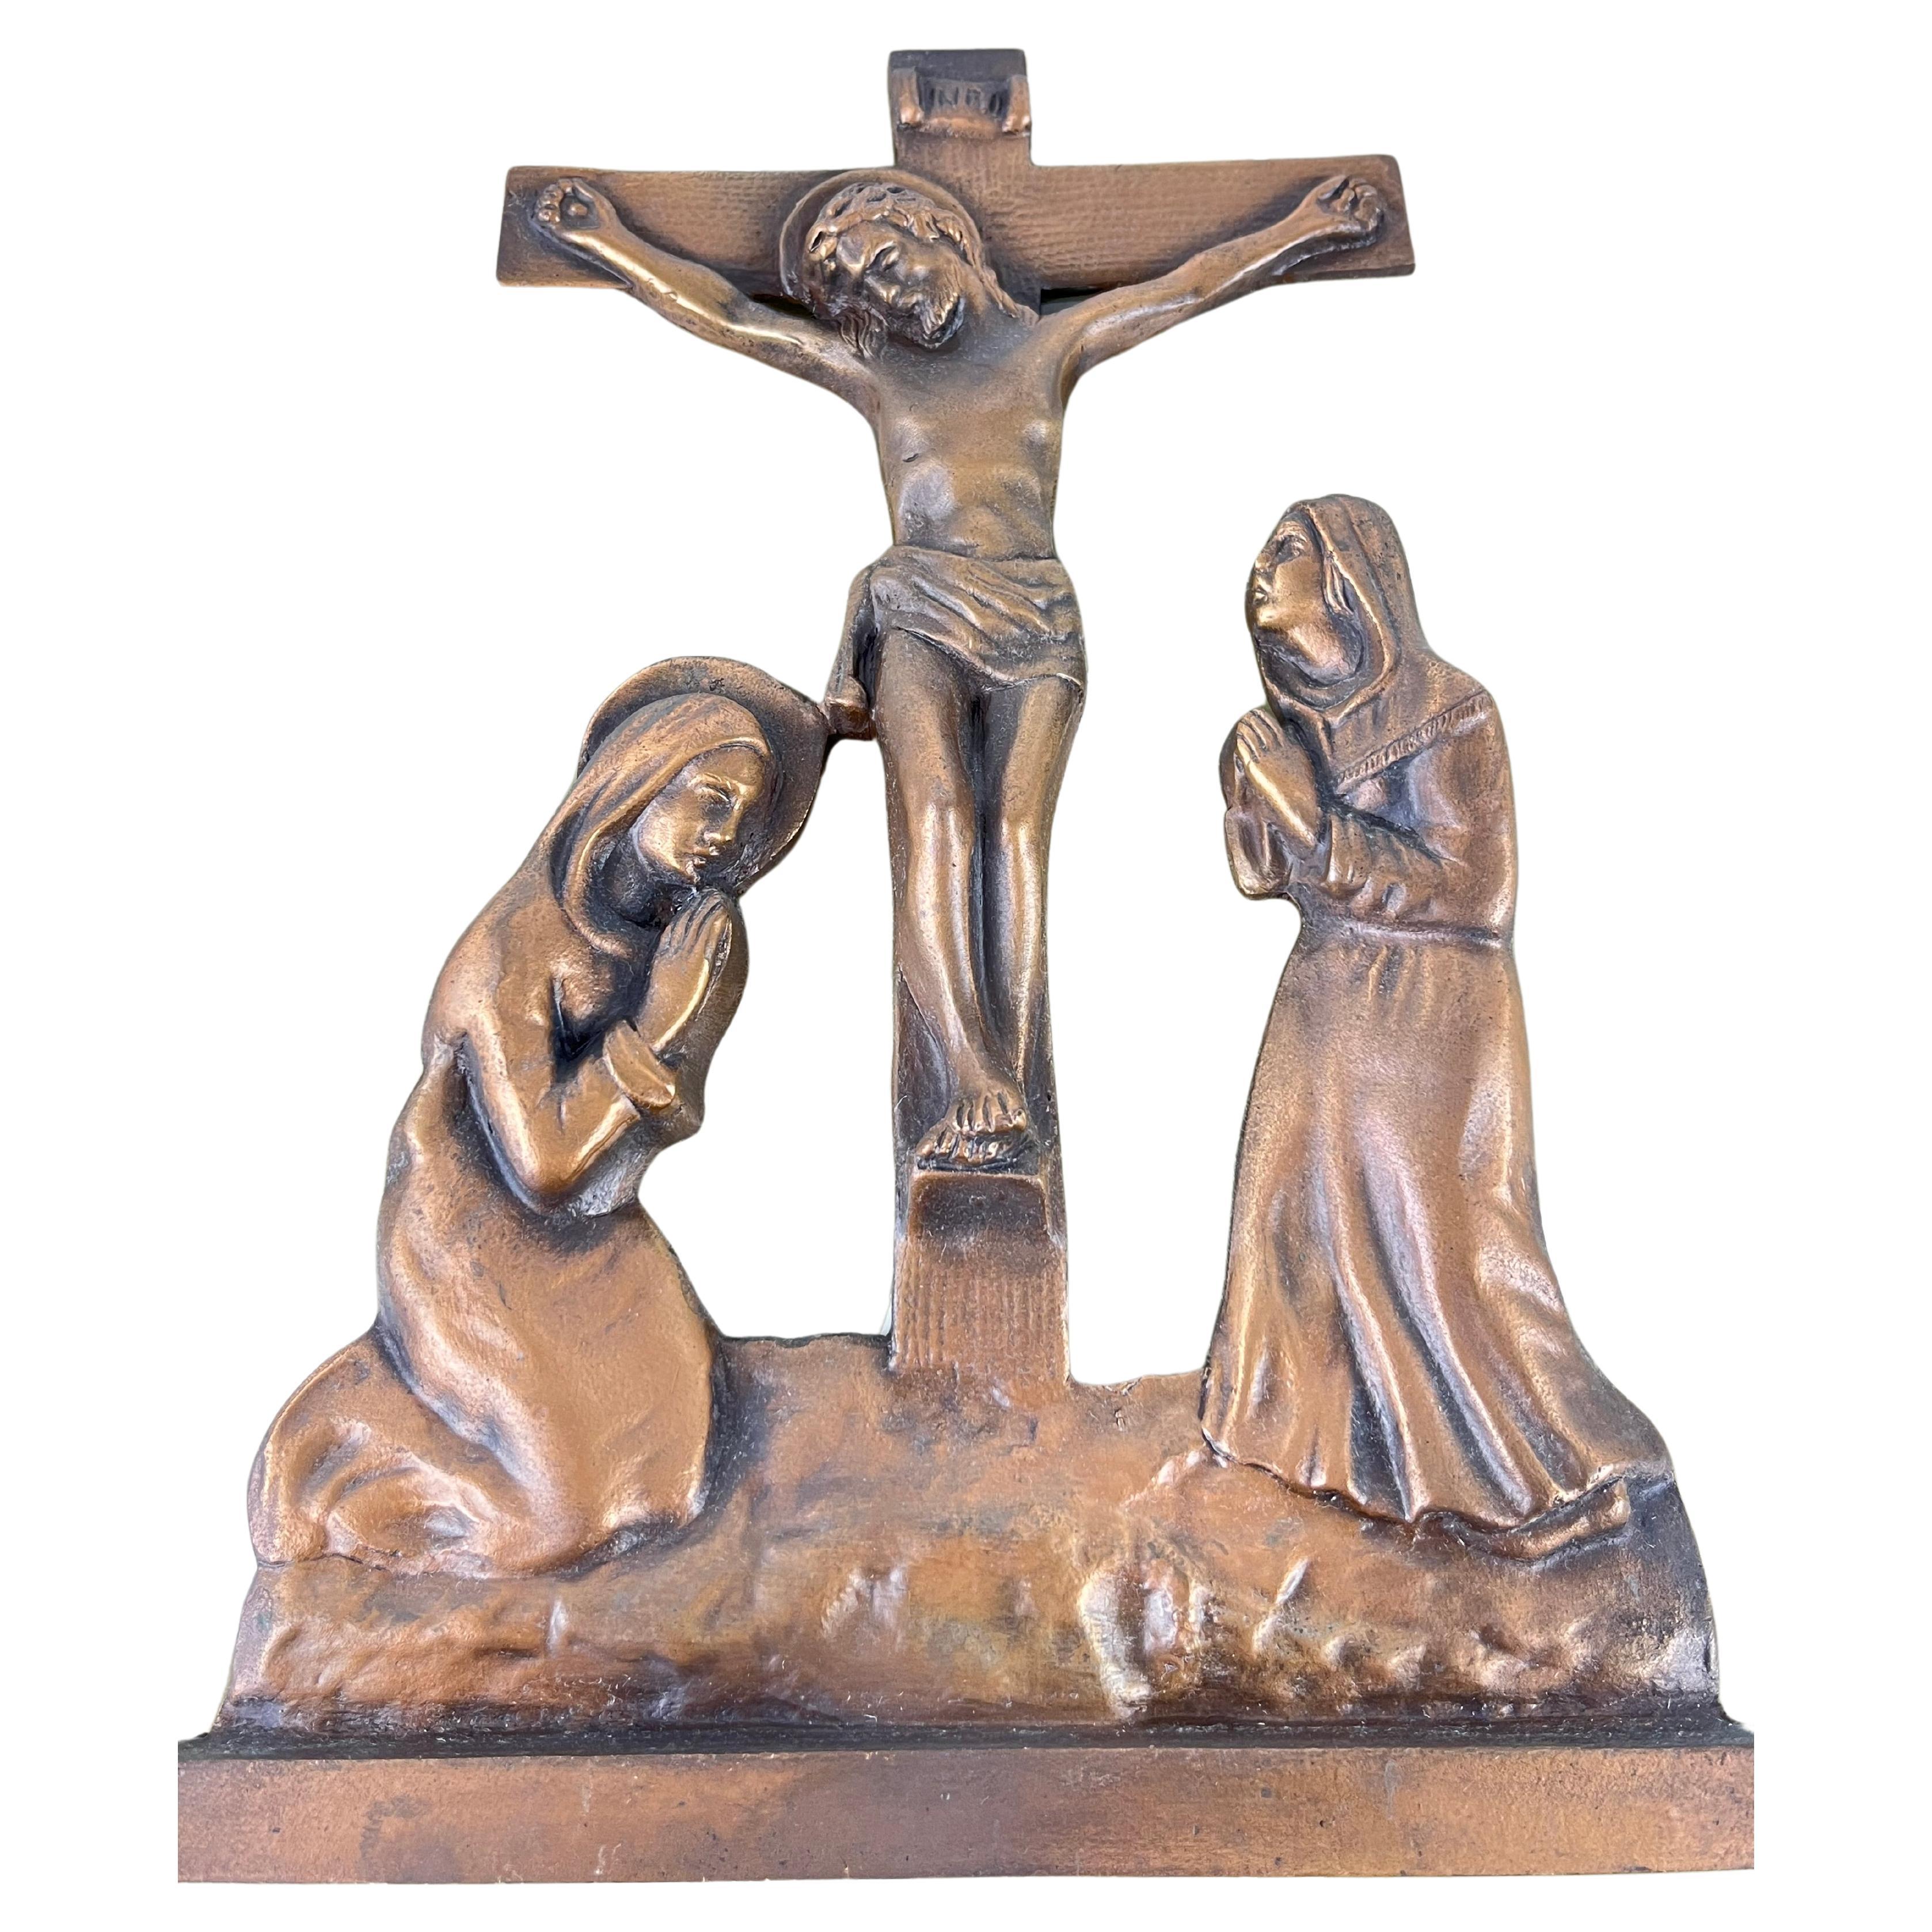 Jesus on the Cross, Bronze on plexiglass, Italy, 1970s
Found in a noble apartment, intact, small signs of aging.